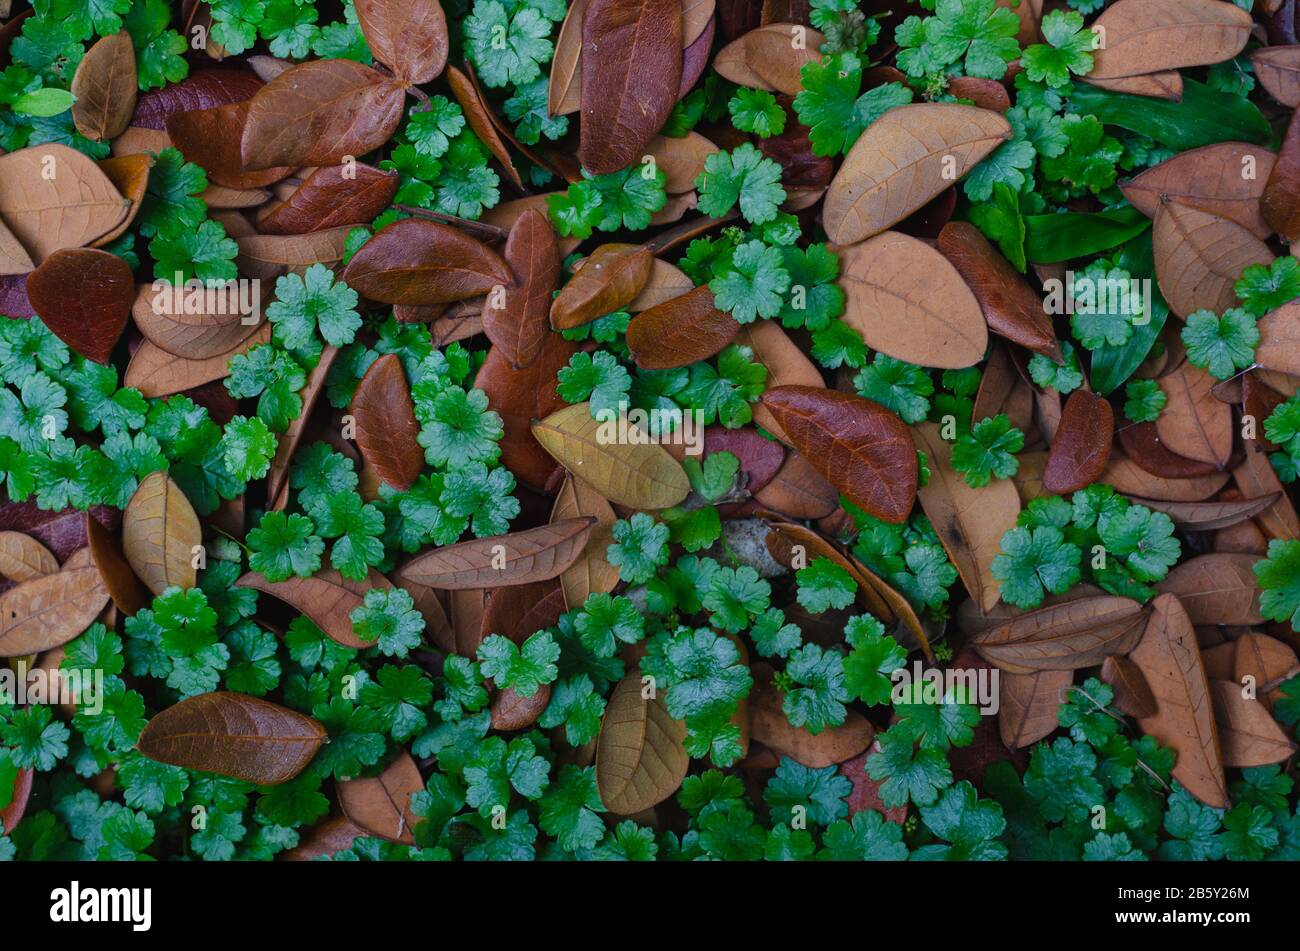 Lawn Marsh Pennywort tree (Hydrocotyle sibthorpioides) with dried leaves of Rain tree for background concept. Stock Photo